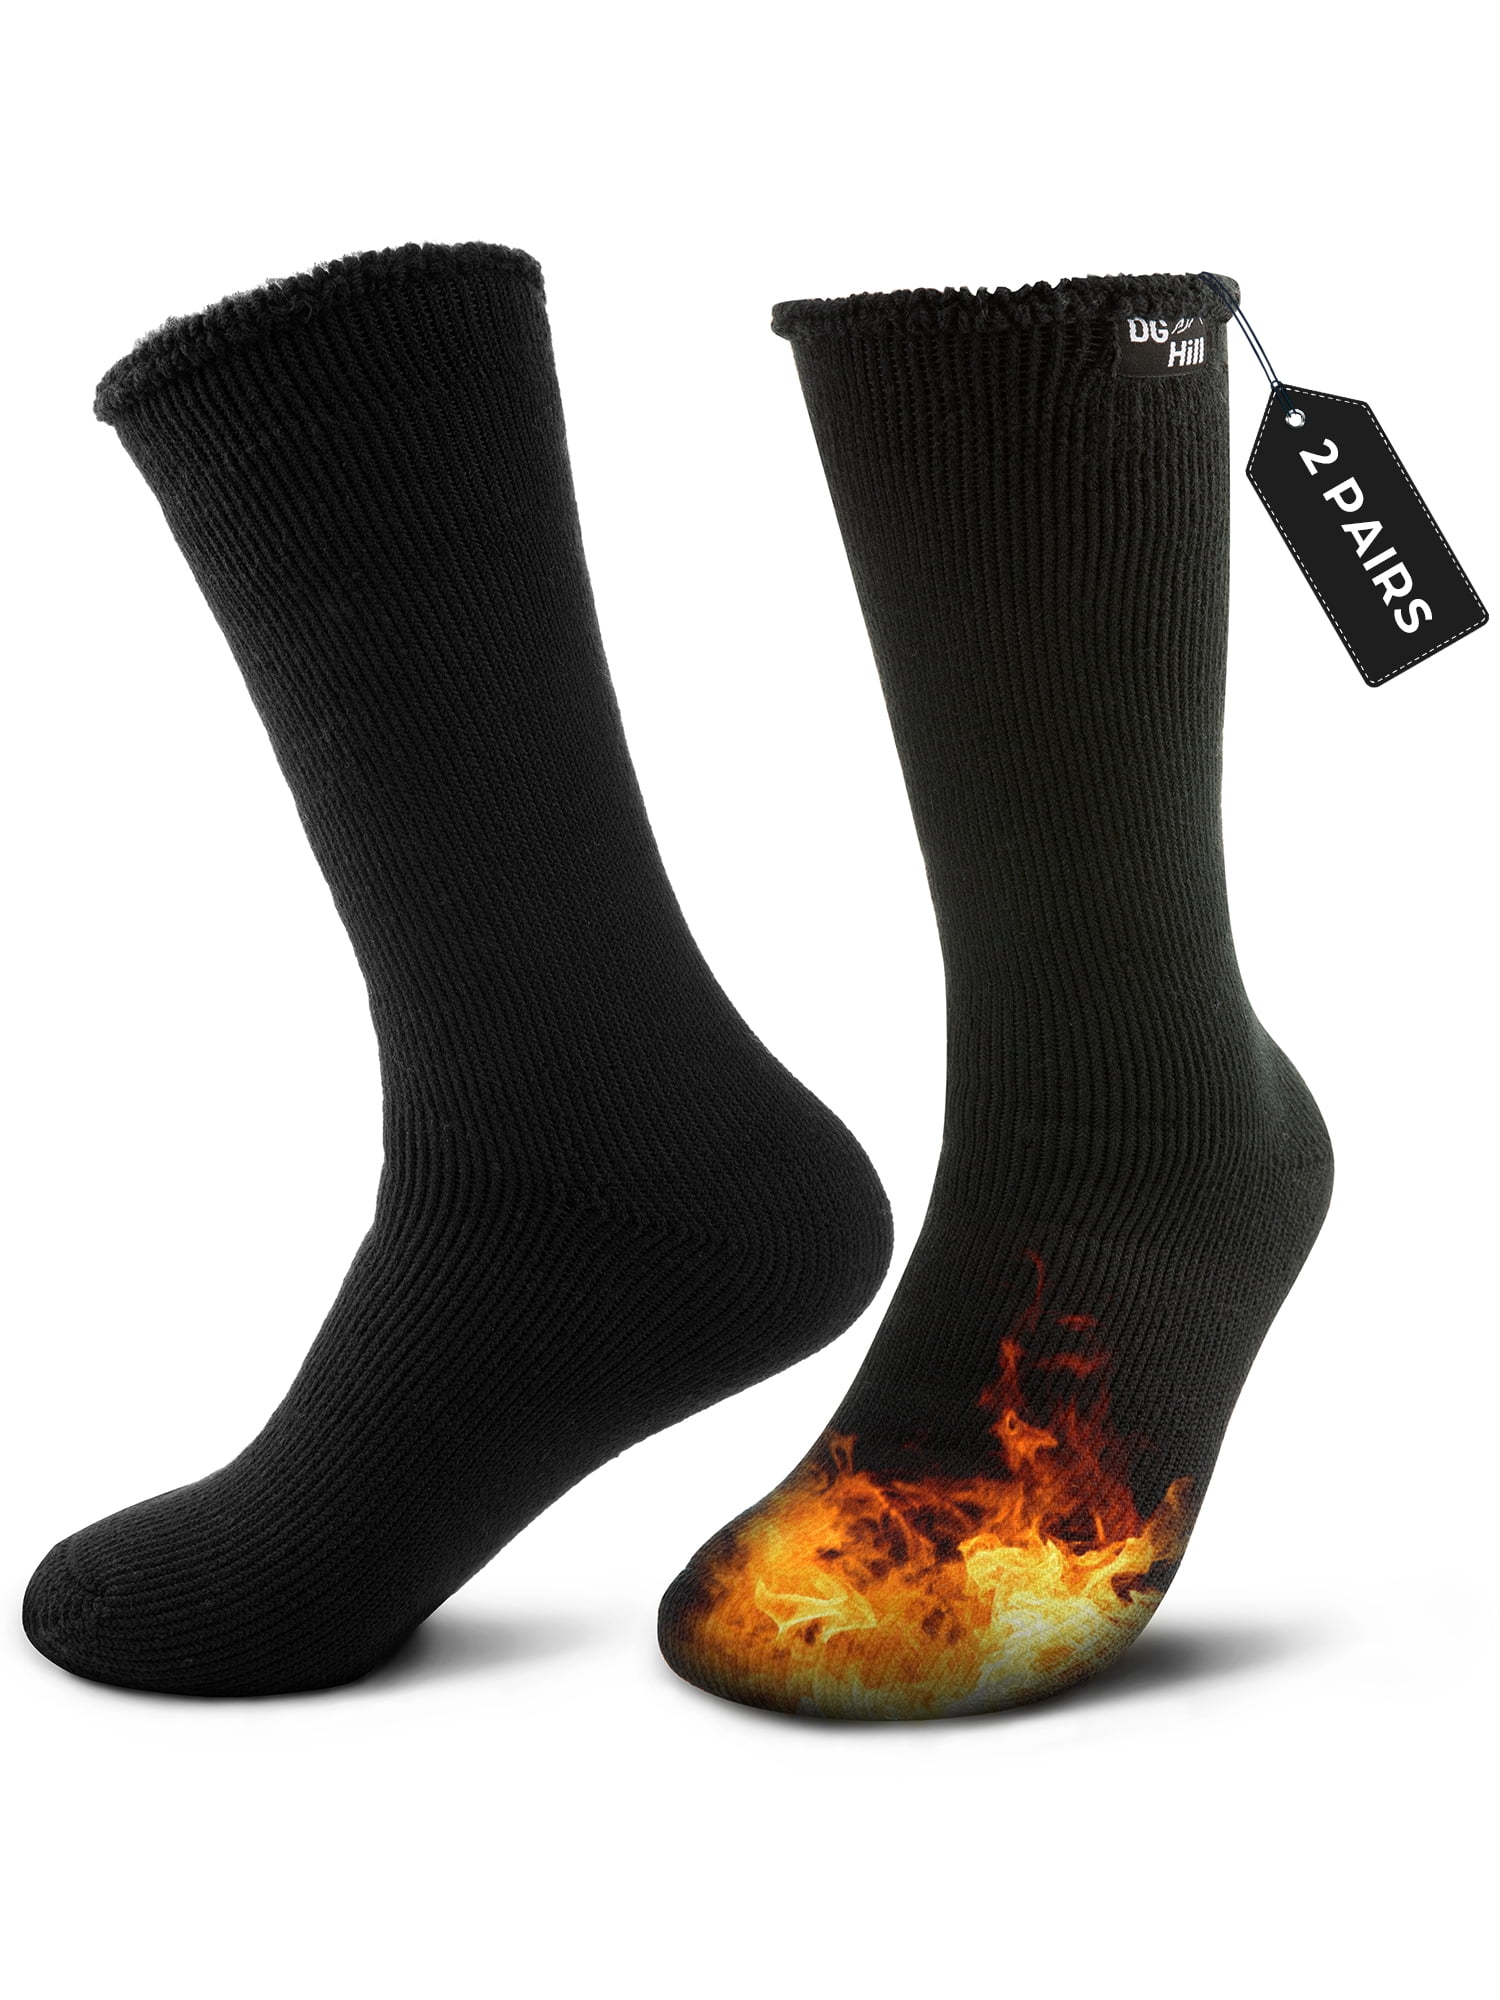 IQONEC 3 Pair Mens Black Warm Thermal Socks Winter Outdoor Work Thick Heavy  Duty